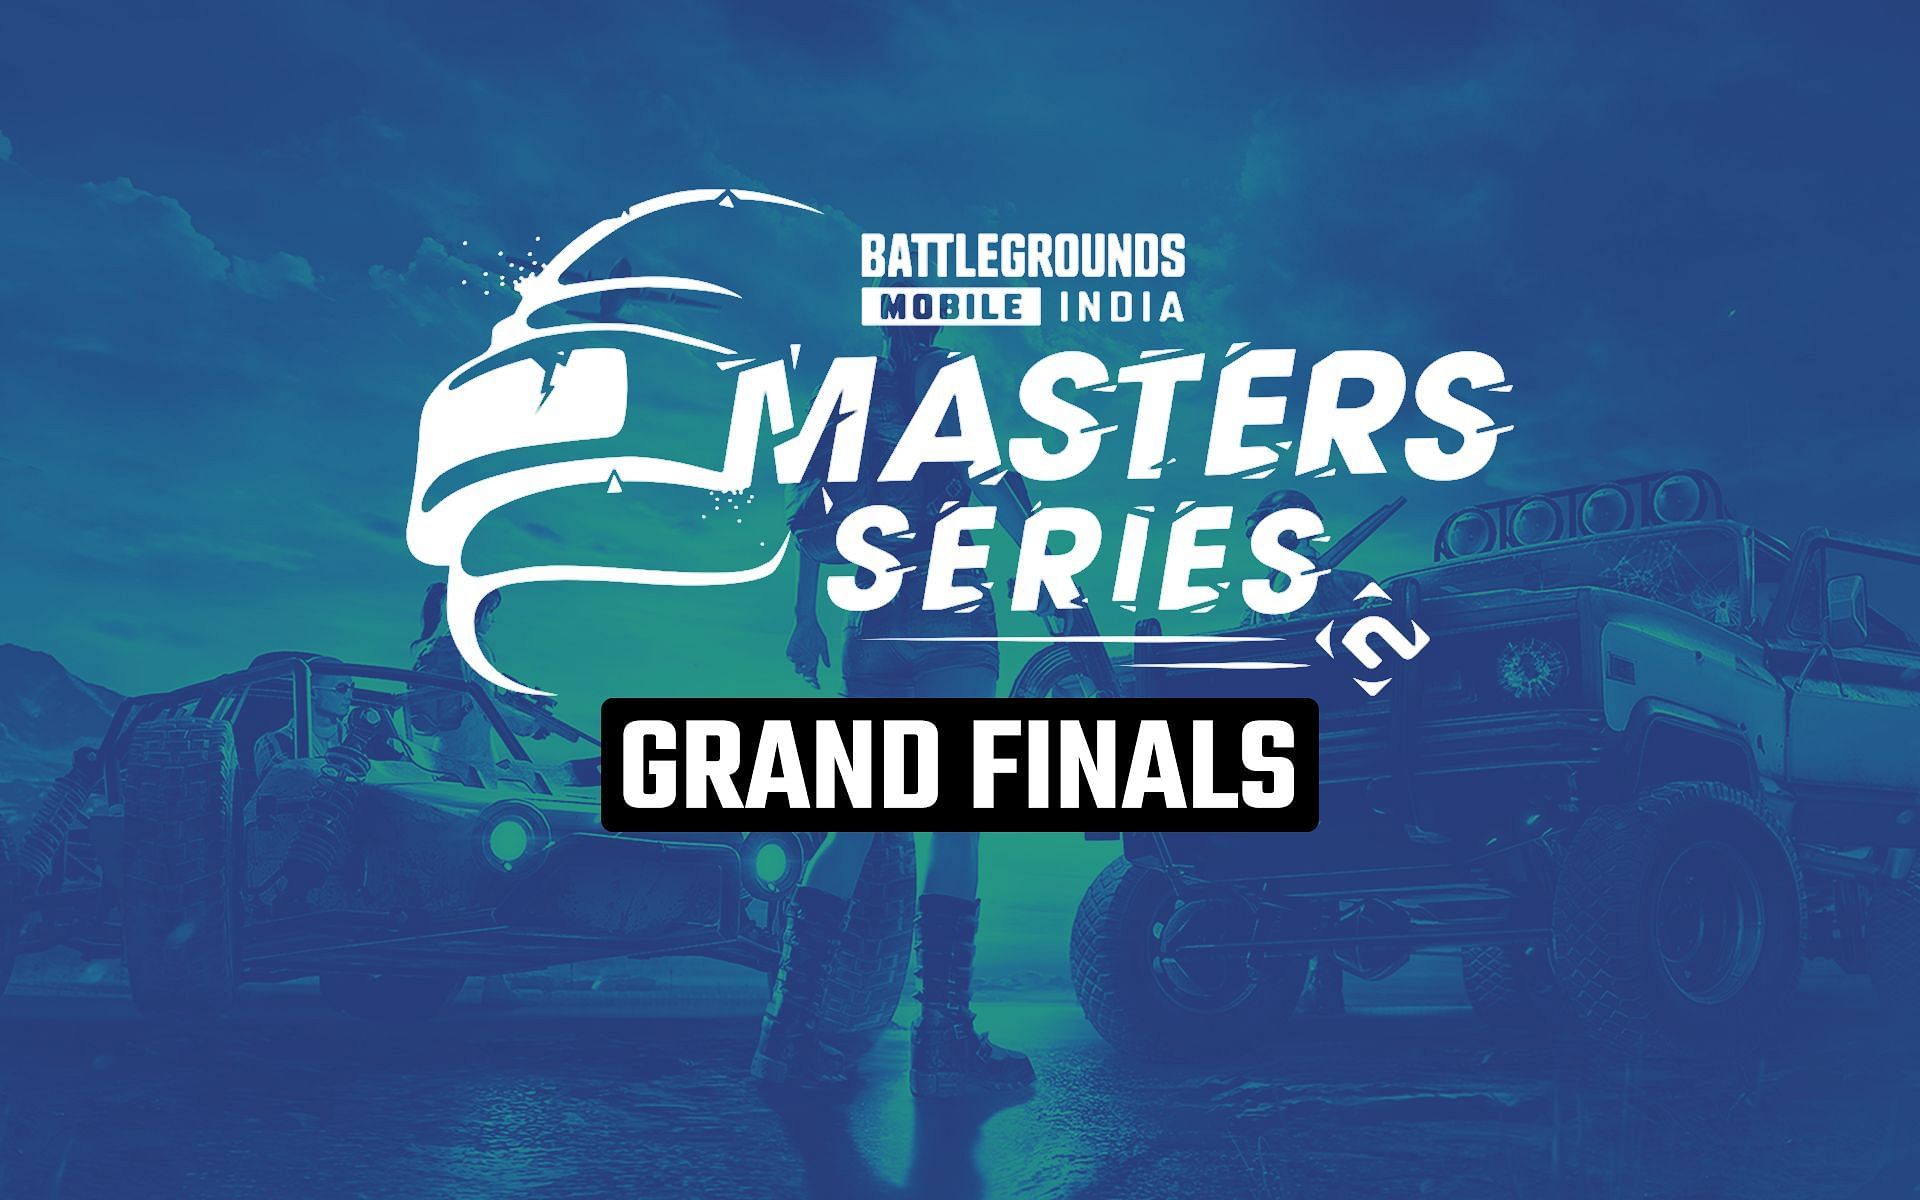 The top 16 teams from the Leagues Stages will feature in the Grand Finals of BGMI Masters Series (Image via Sportskeeda)